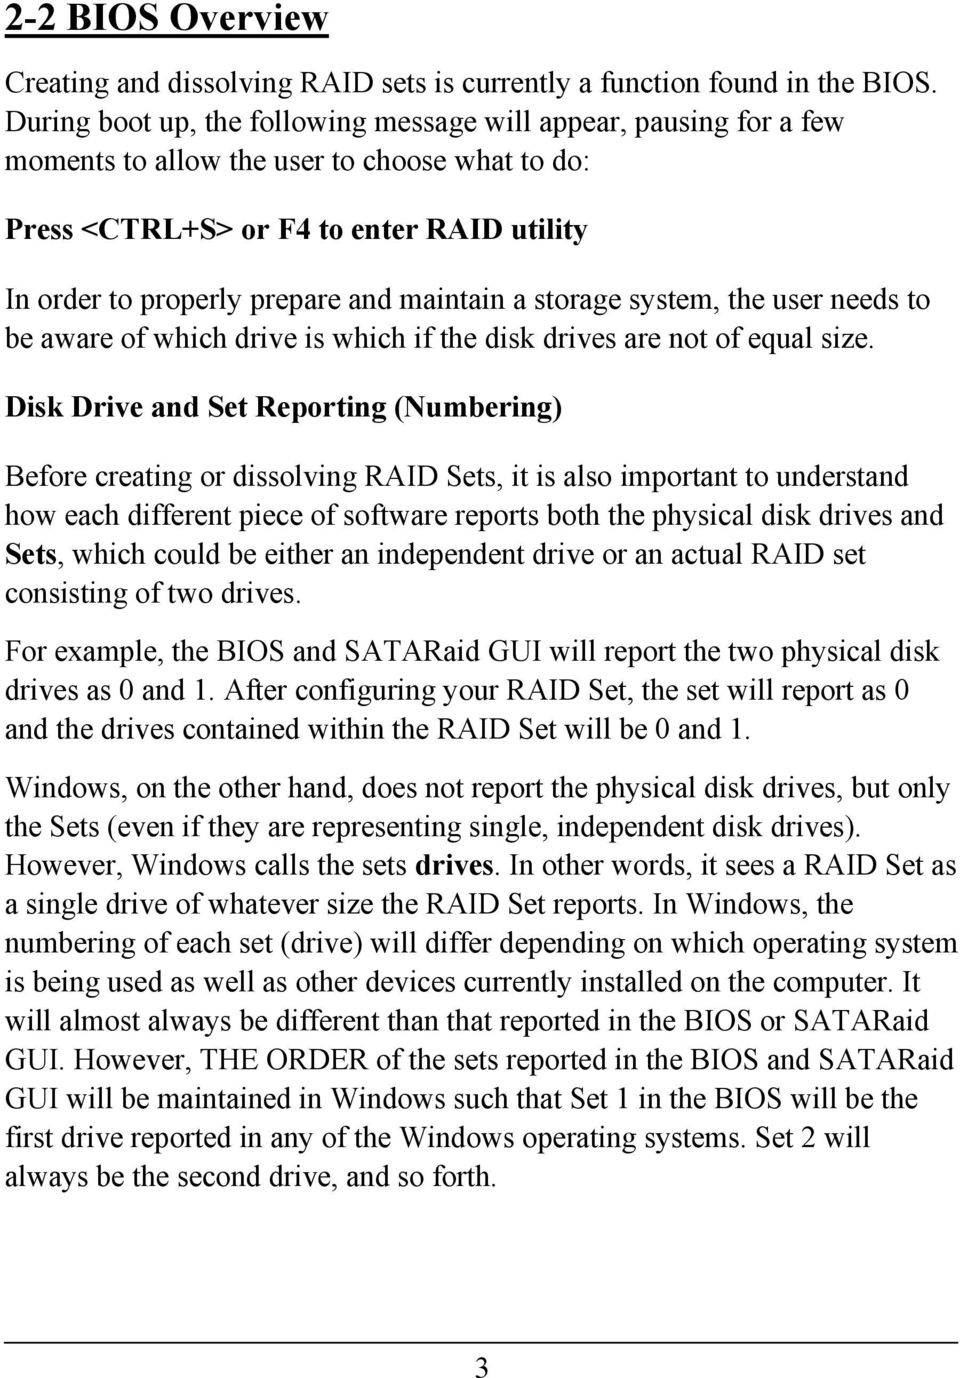 maintain a storage system, the user needs to be aware of which drive is which if the disk drives are not of equal size.